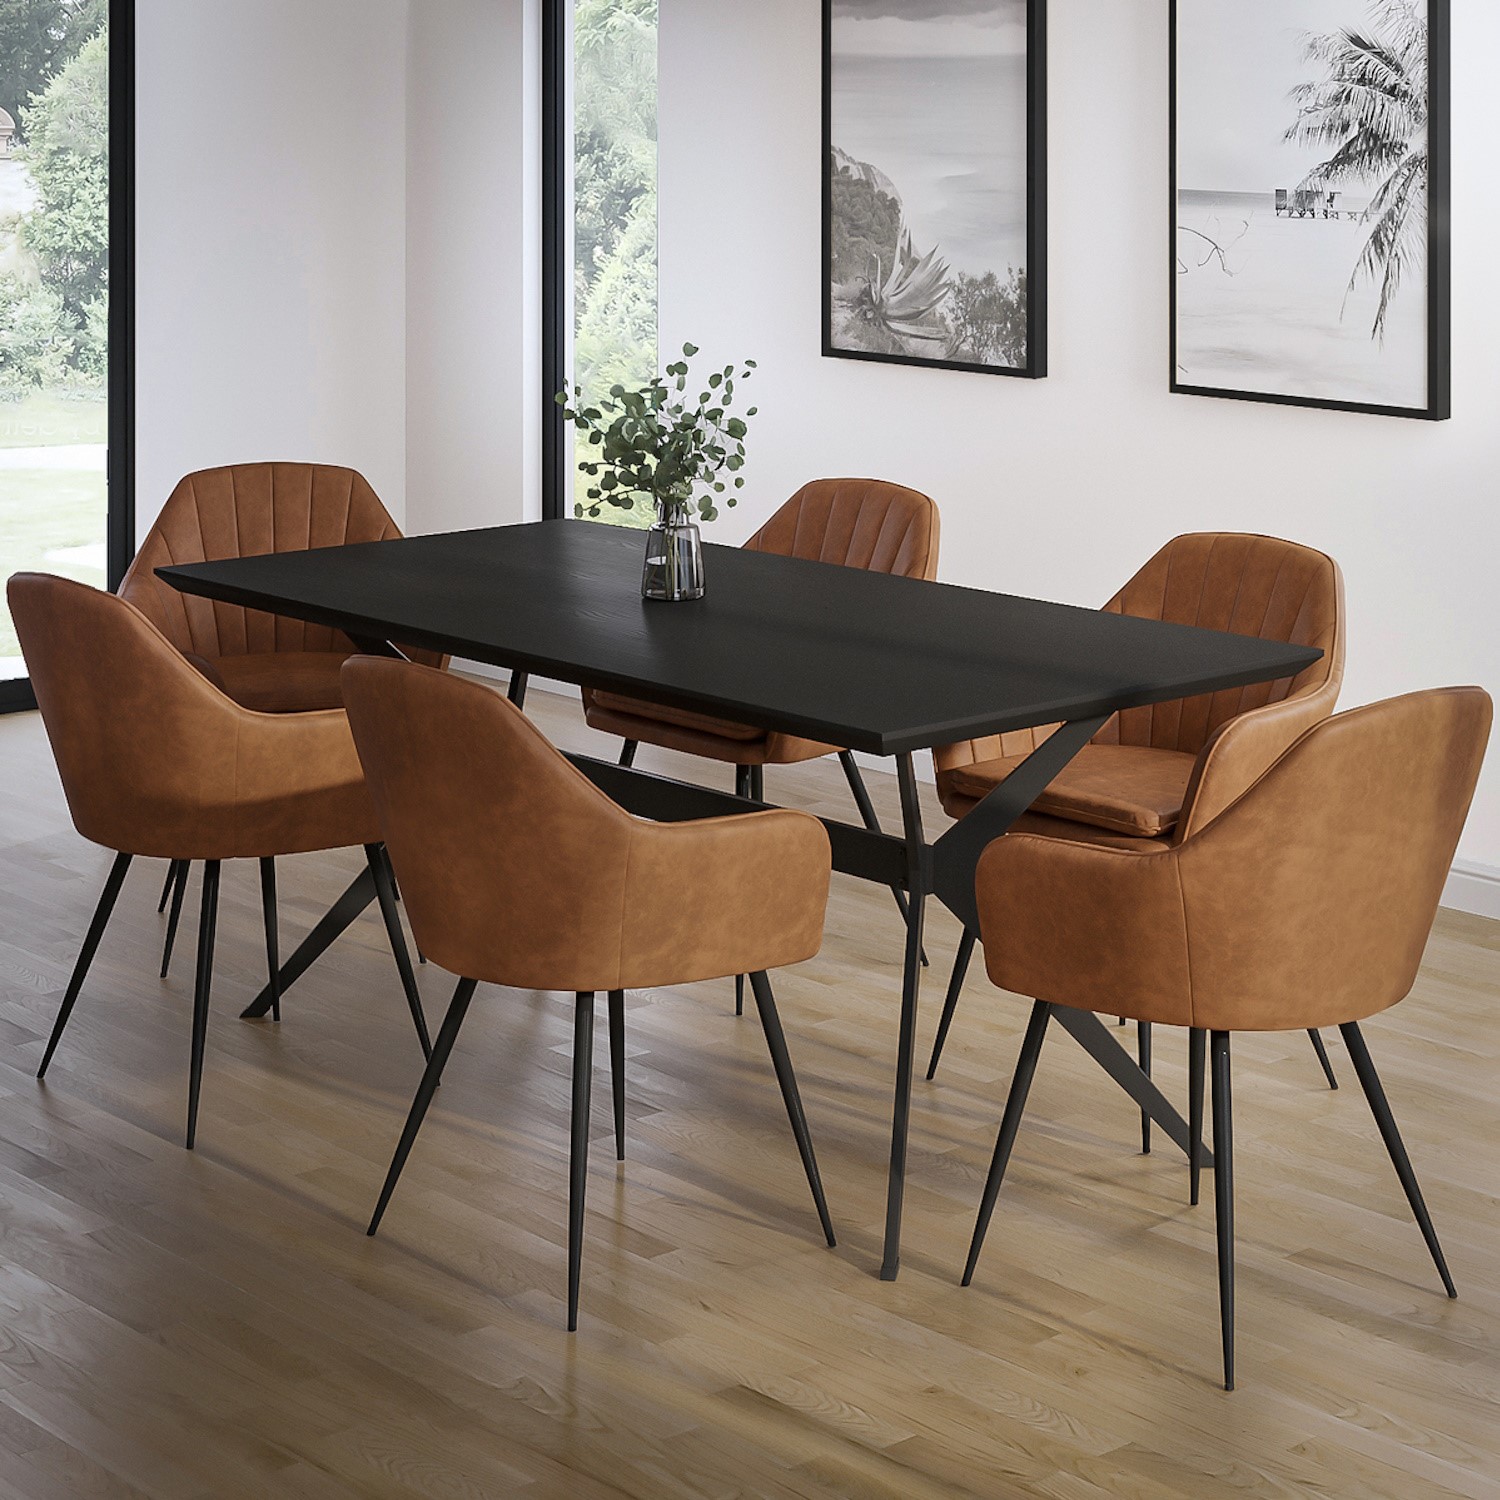 black dining table